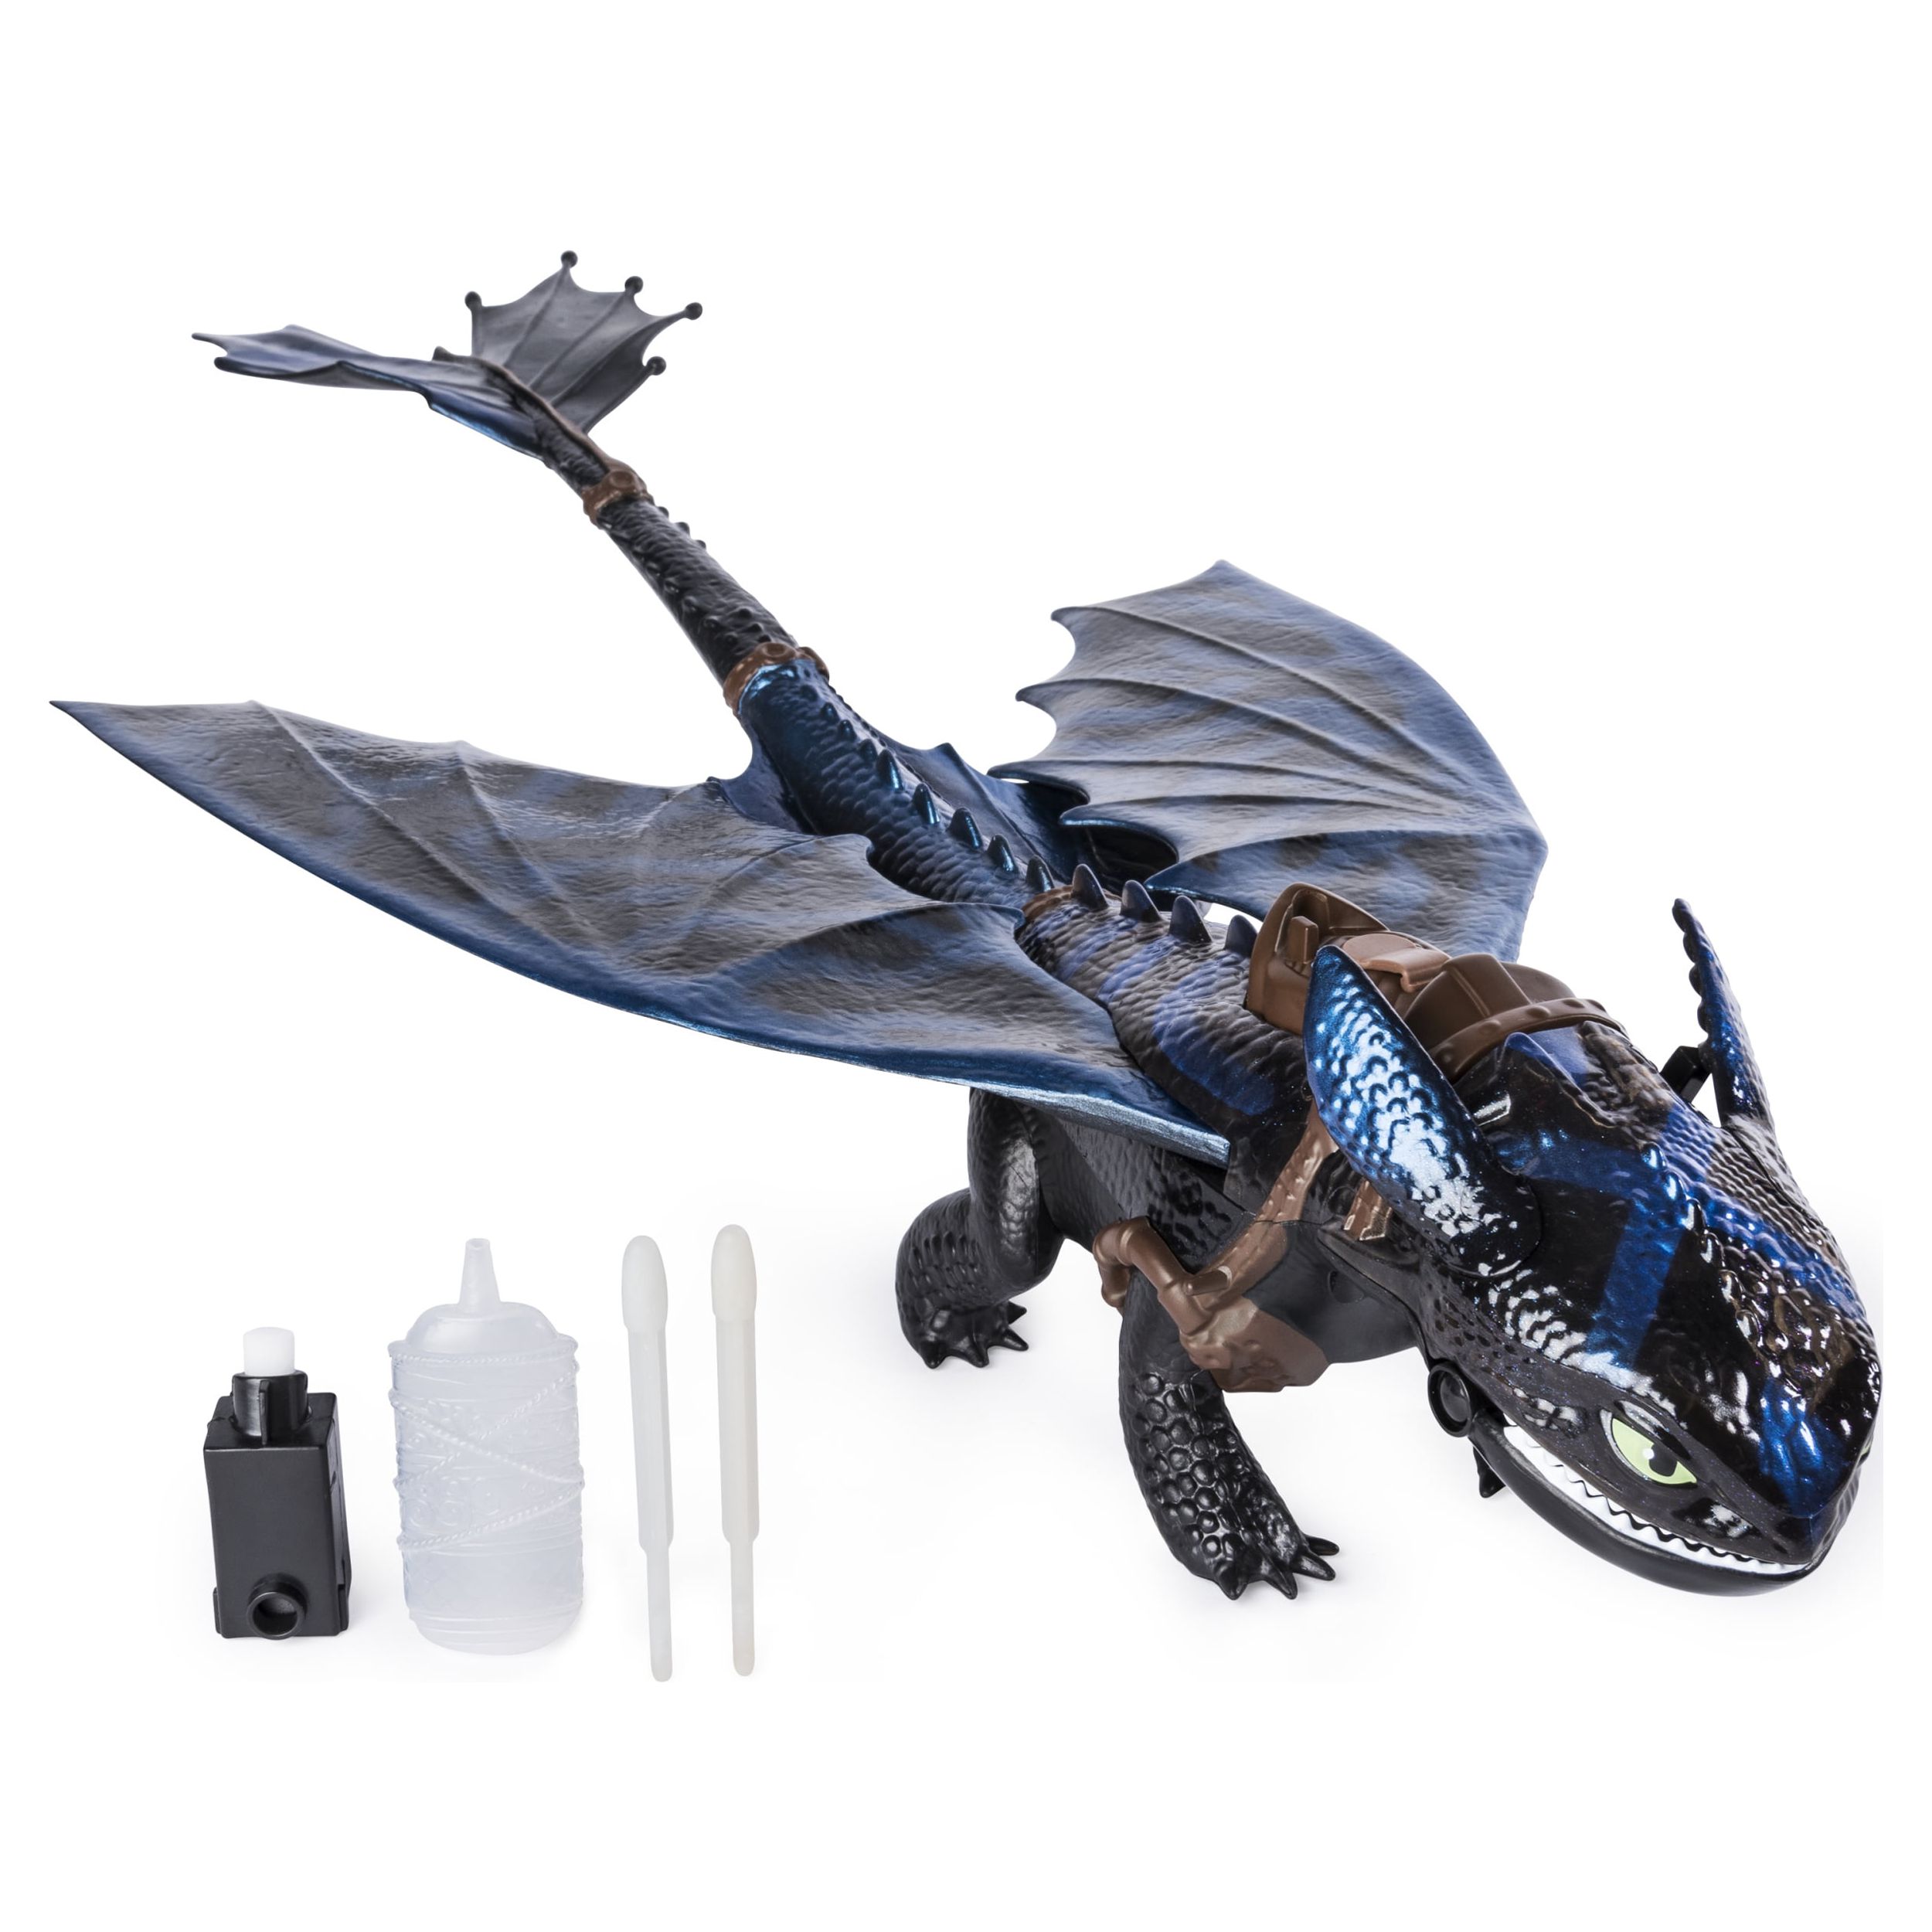 DreamWorks Dragons, Giant Fire Breathing Toothless Action Figure, 20-inch Dragon with Fire Breathing Effects - image 2 of 8